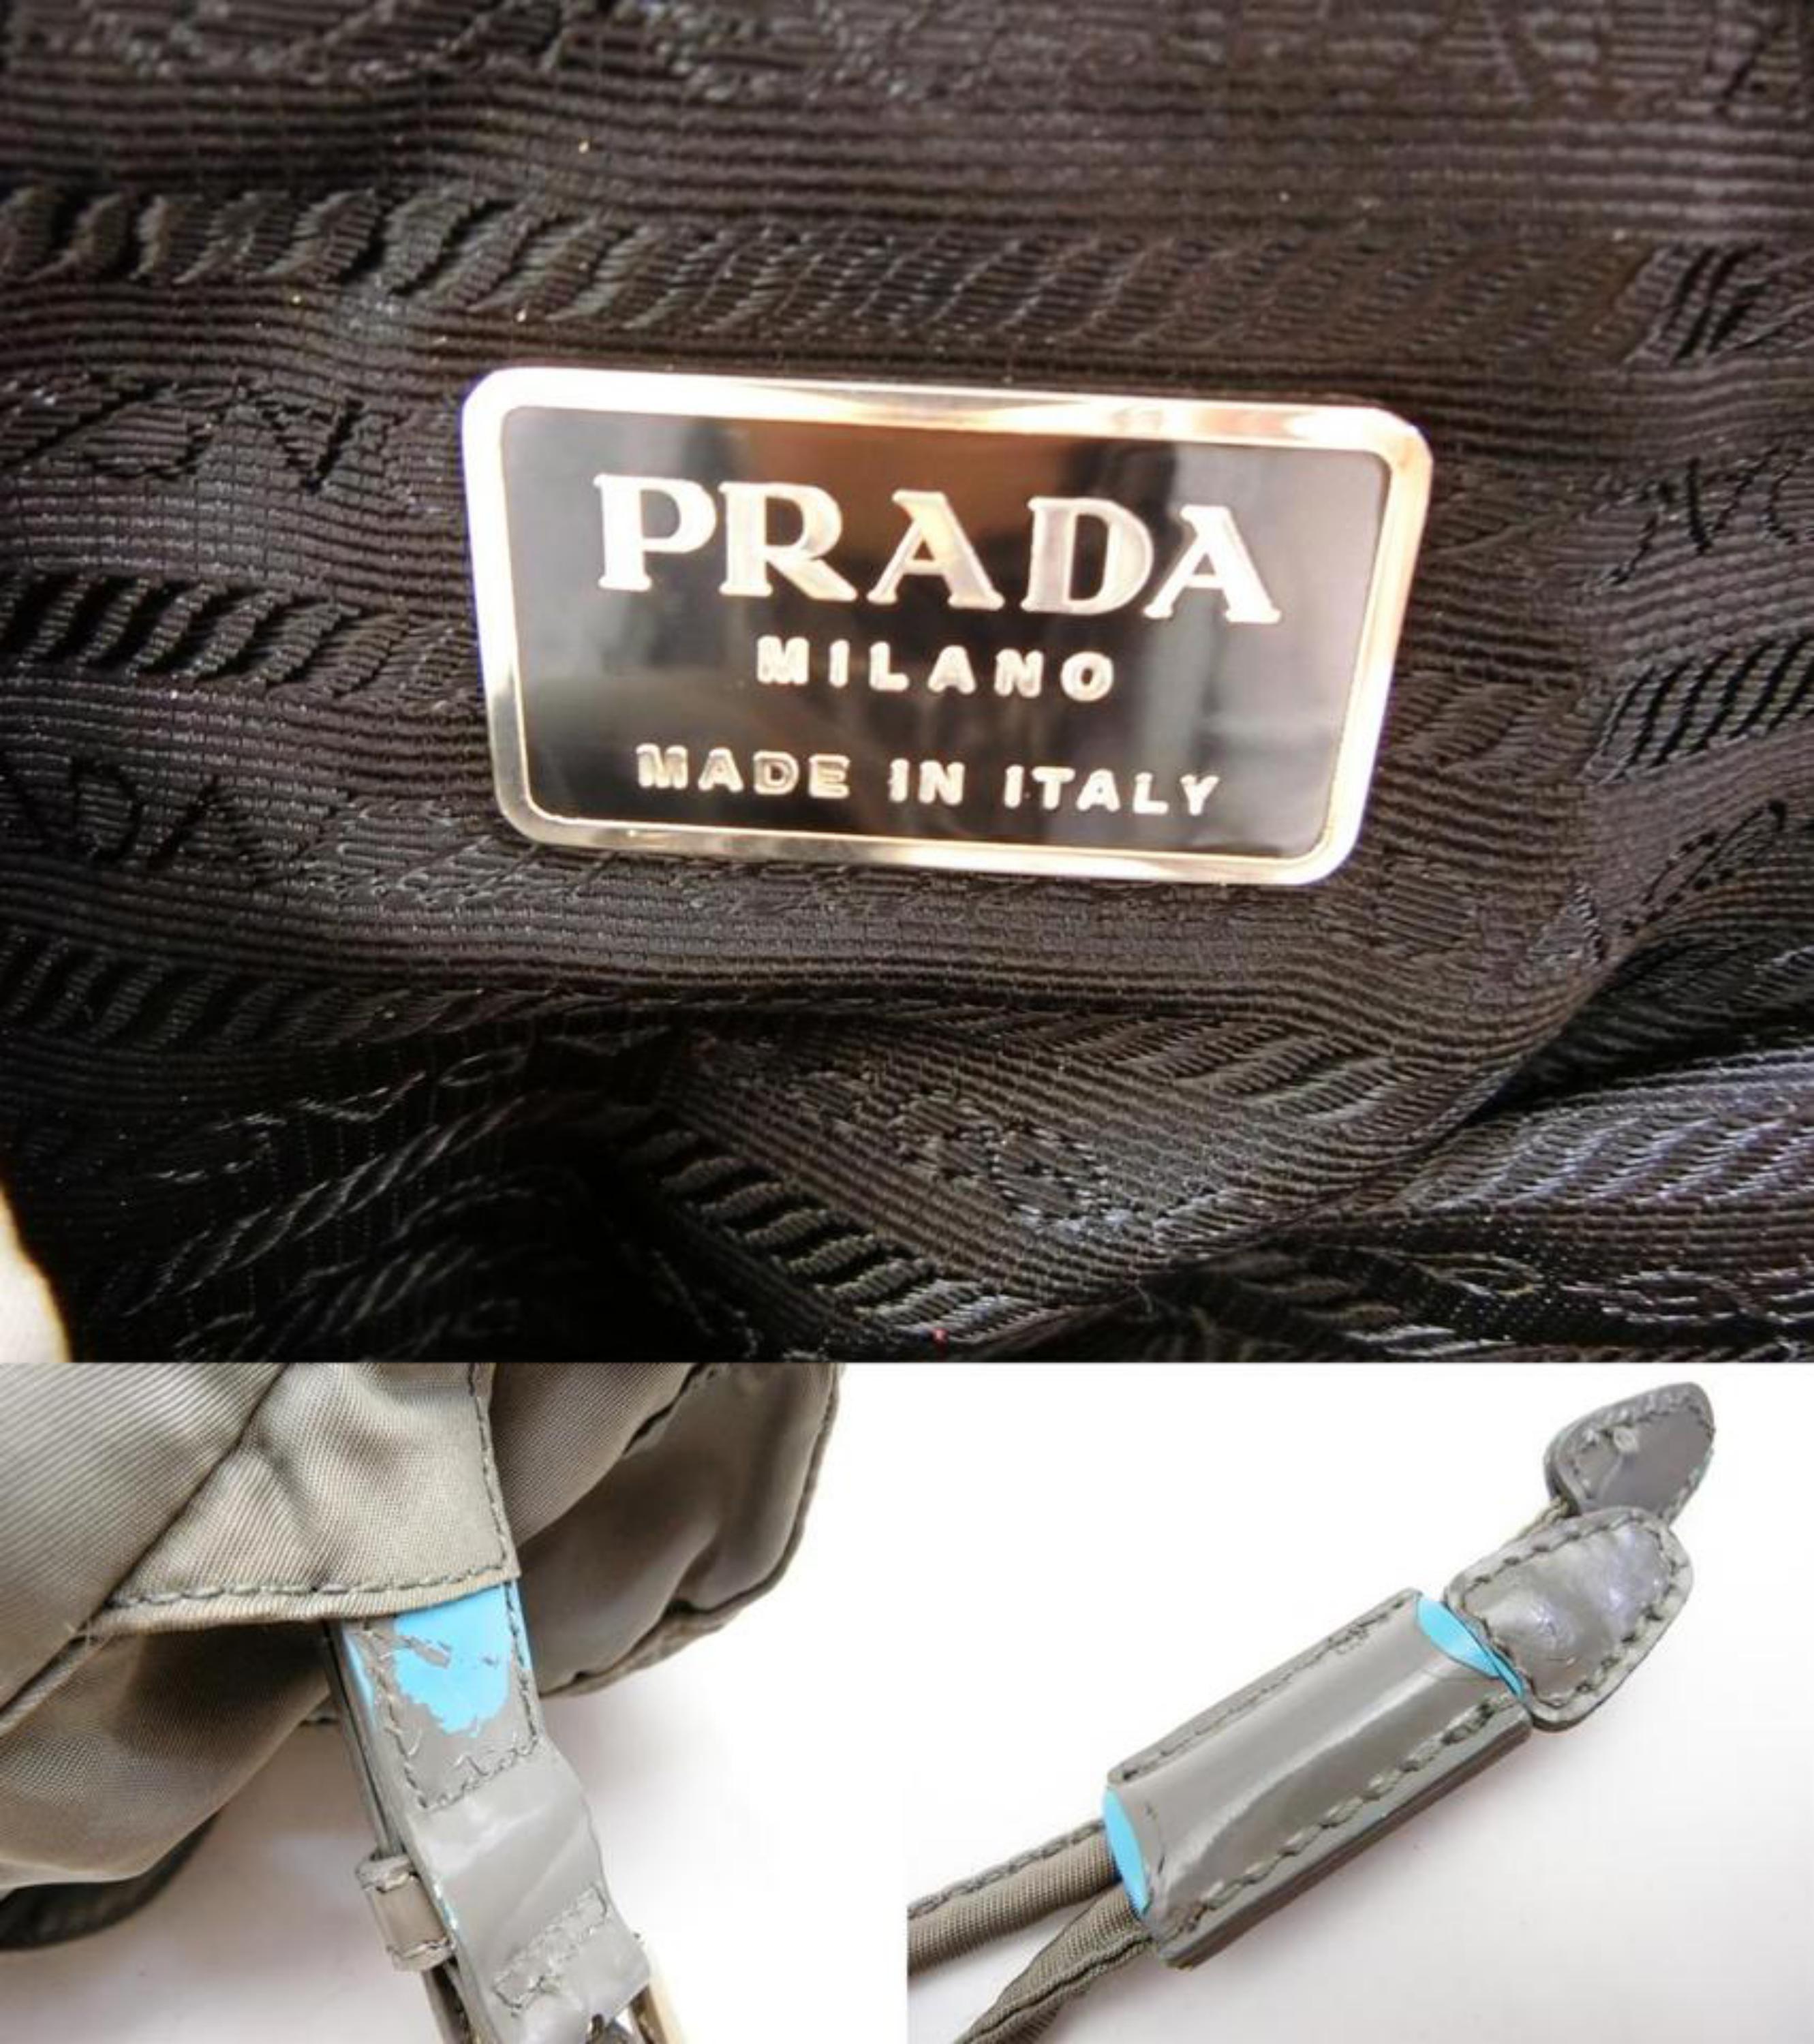 Made In: Italy
Measurements: Length: 11